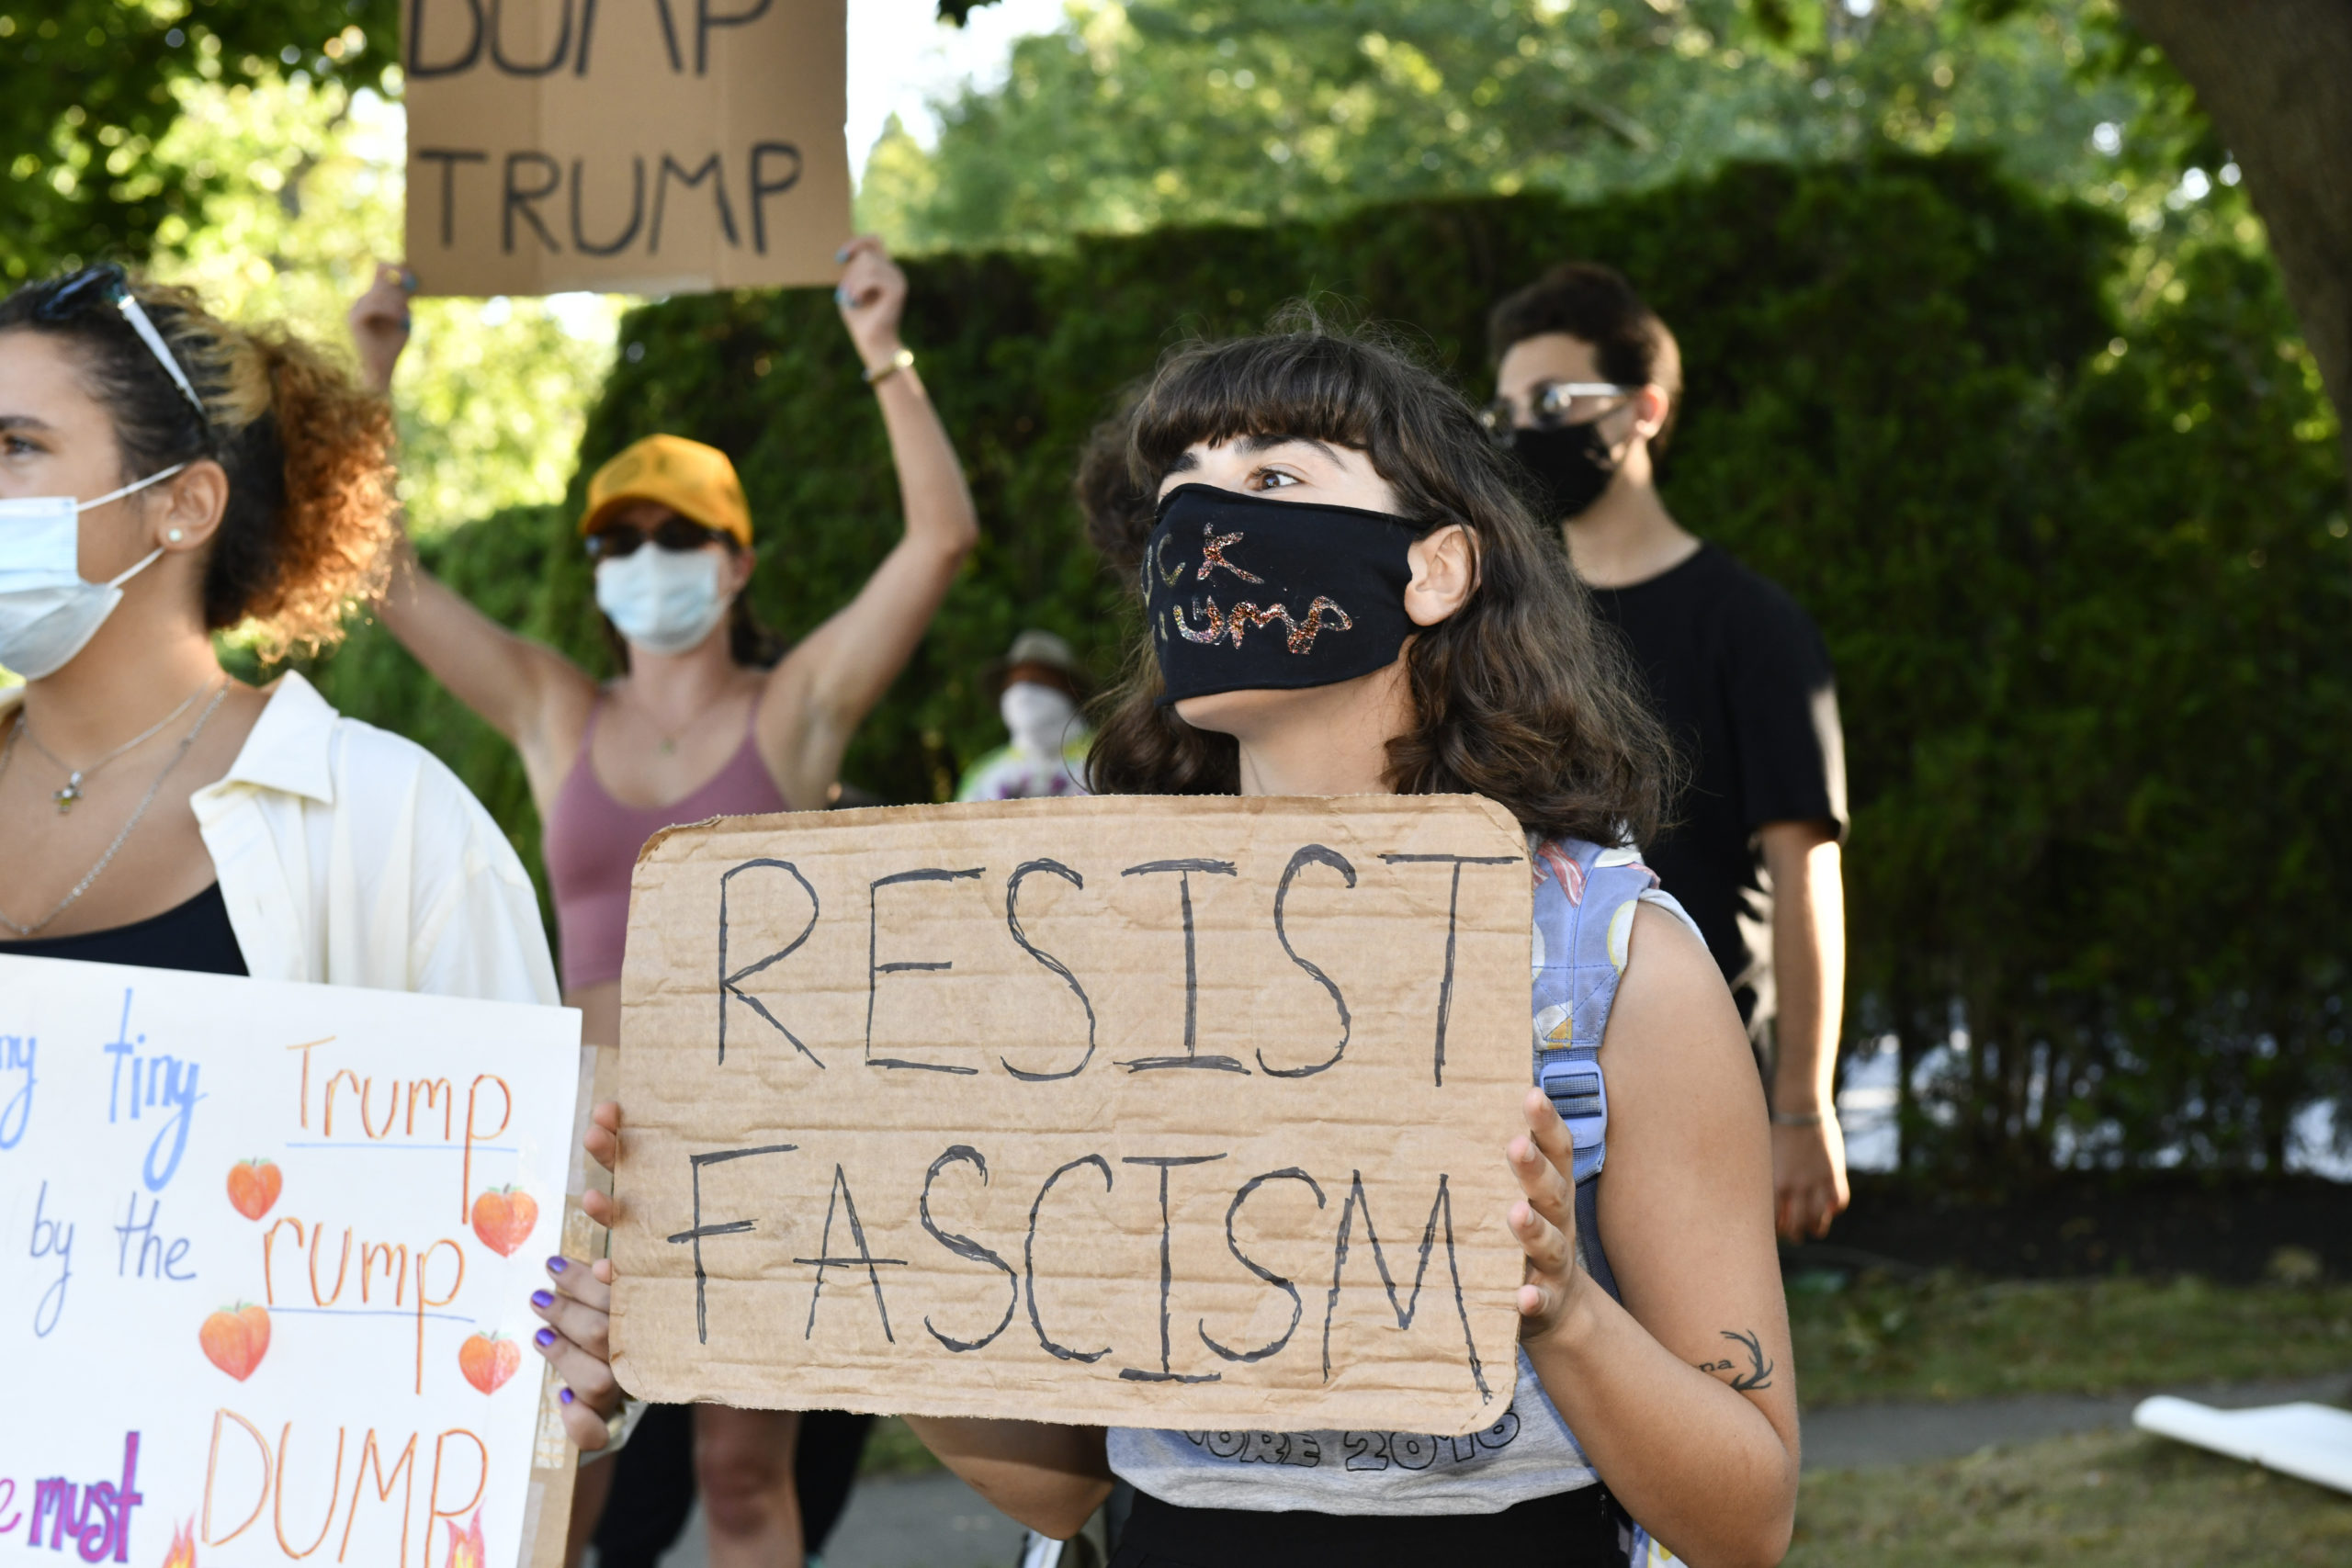 A protest was held in Southampton Village on Saturday afternoon during President Donald Trump's visit for a fundraising event.   DANA SHAW